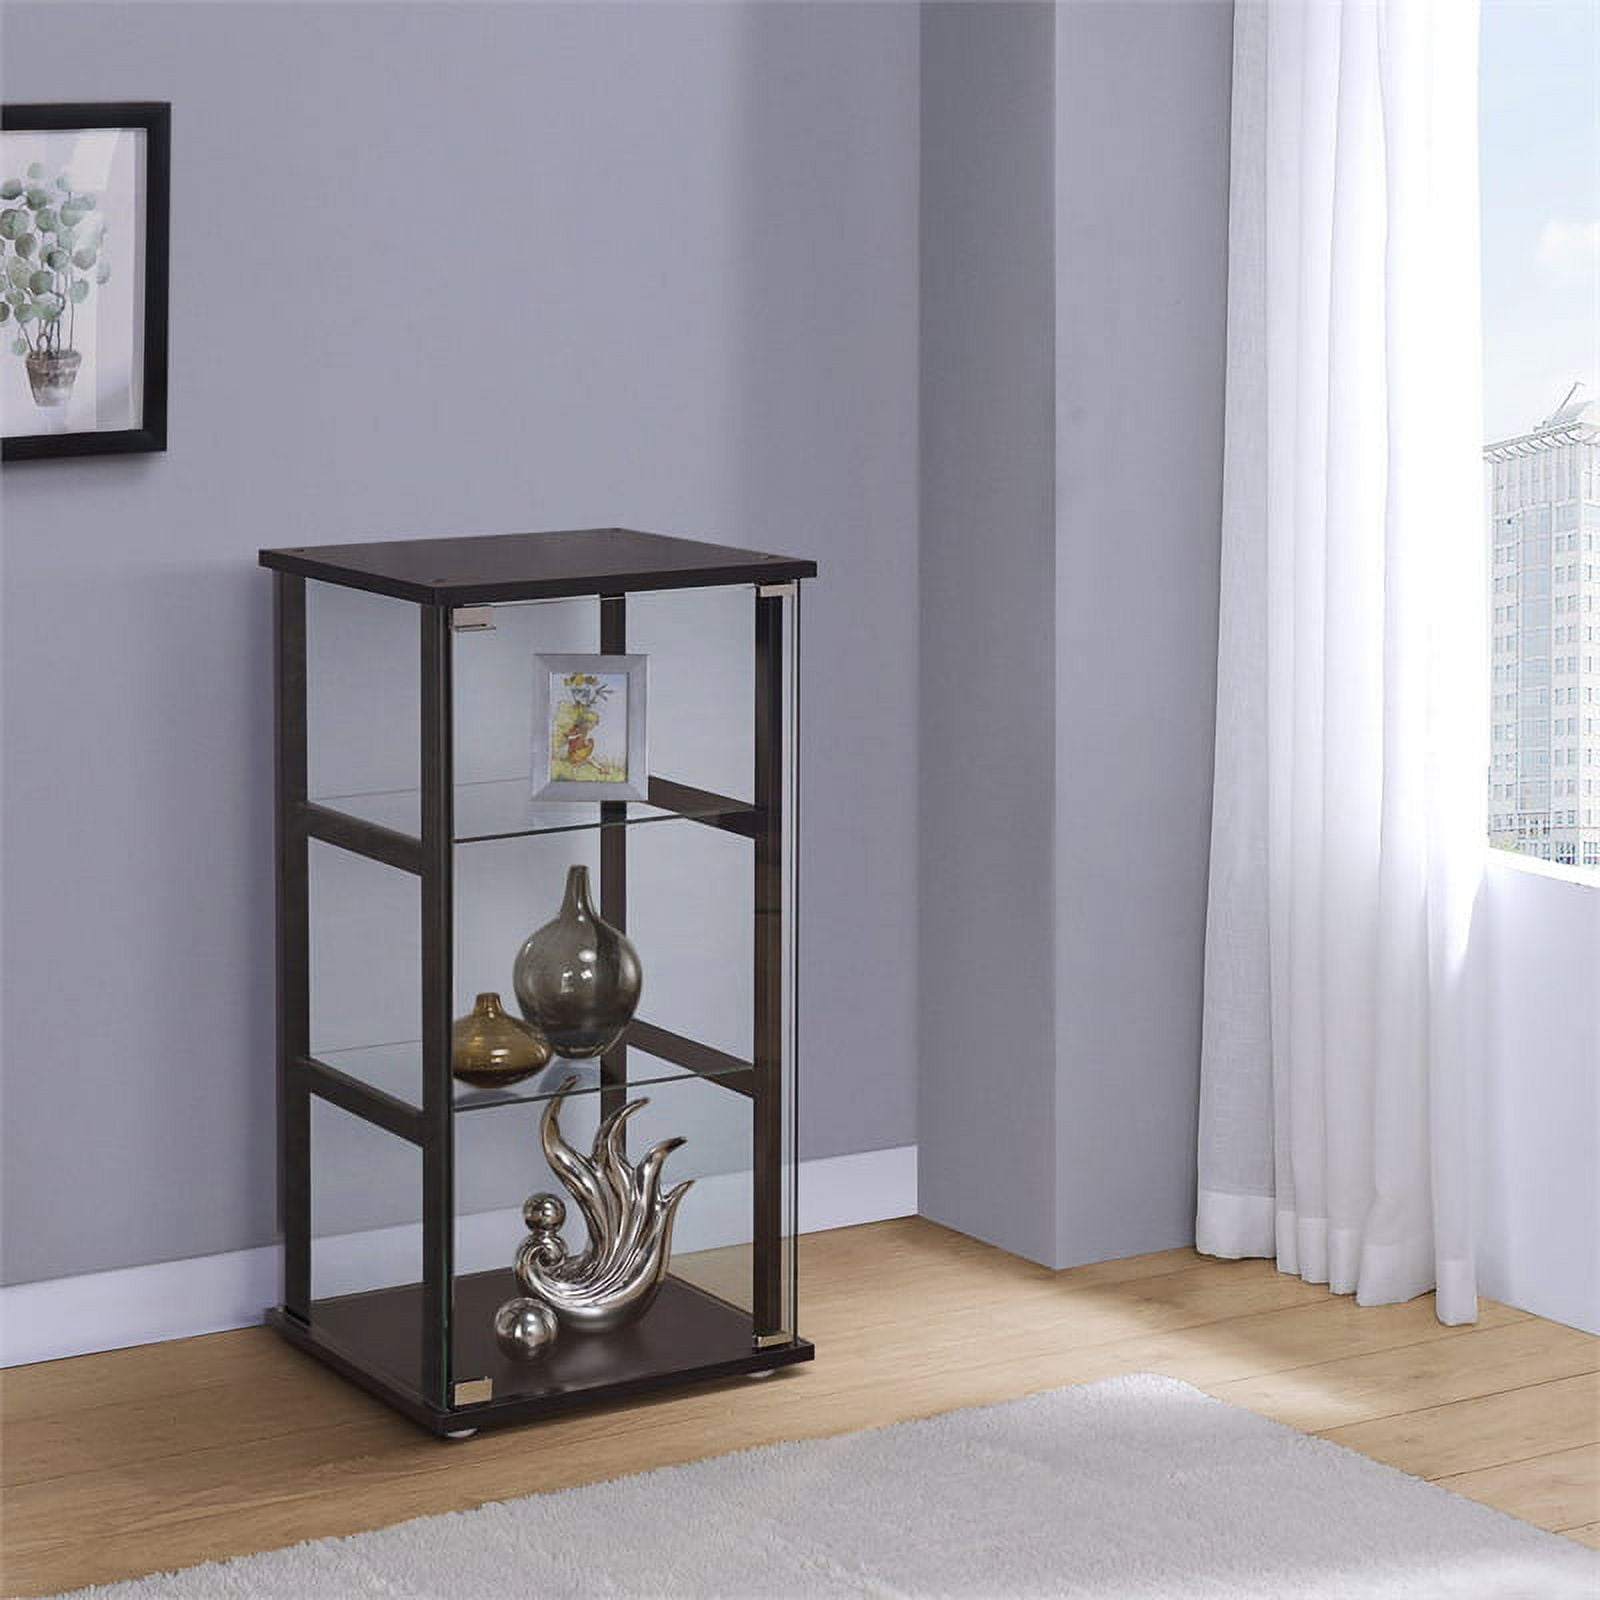 The Glass Shelf Curio Cabinet Clear And Black - 953234 at Jaxco Mattress  Store in Jacksonville, FL.